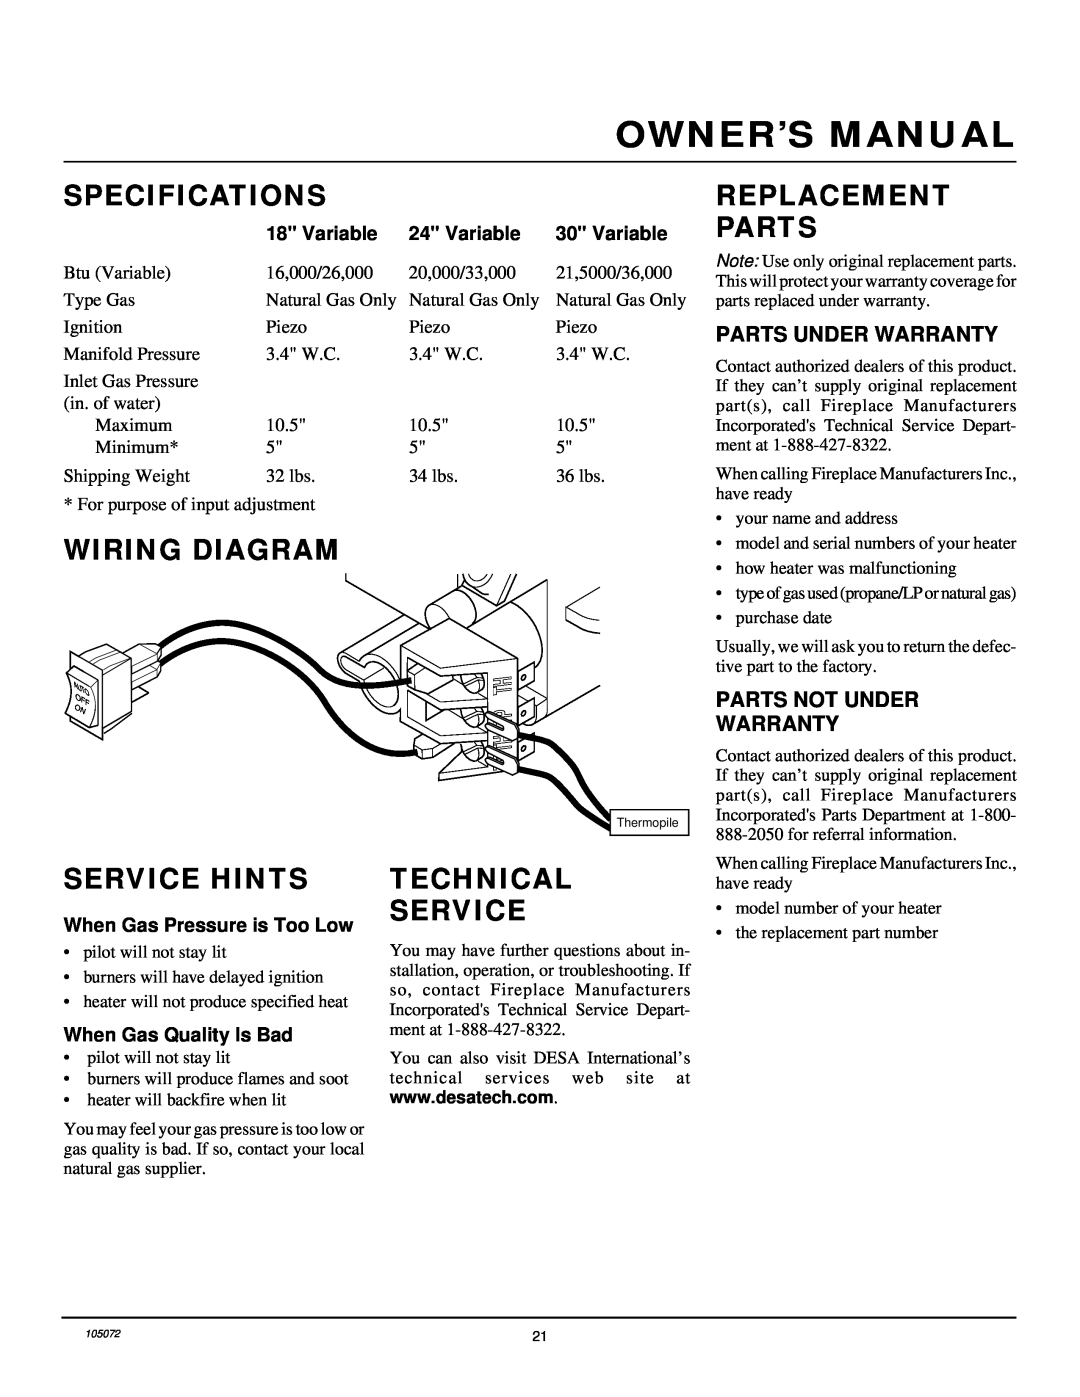 Desa VFN30R, VFN24R, VFN18R Specifications, Wiring Diagram, Replacement Parts, Service Hints, Technical Service 